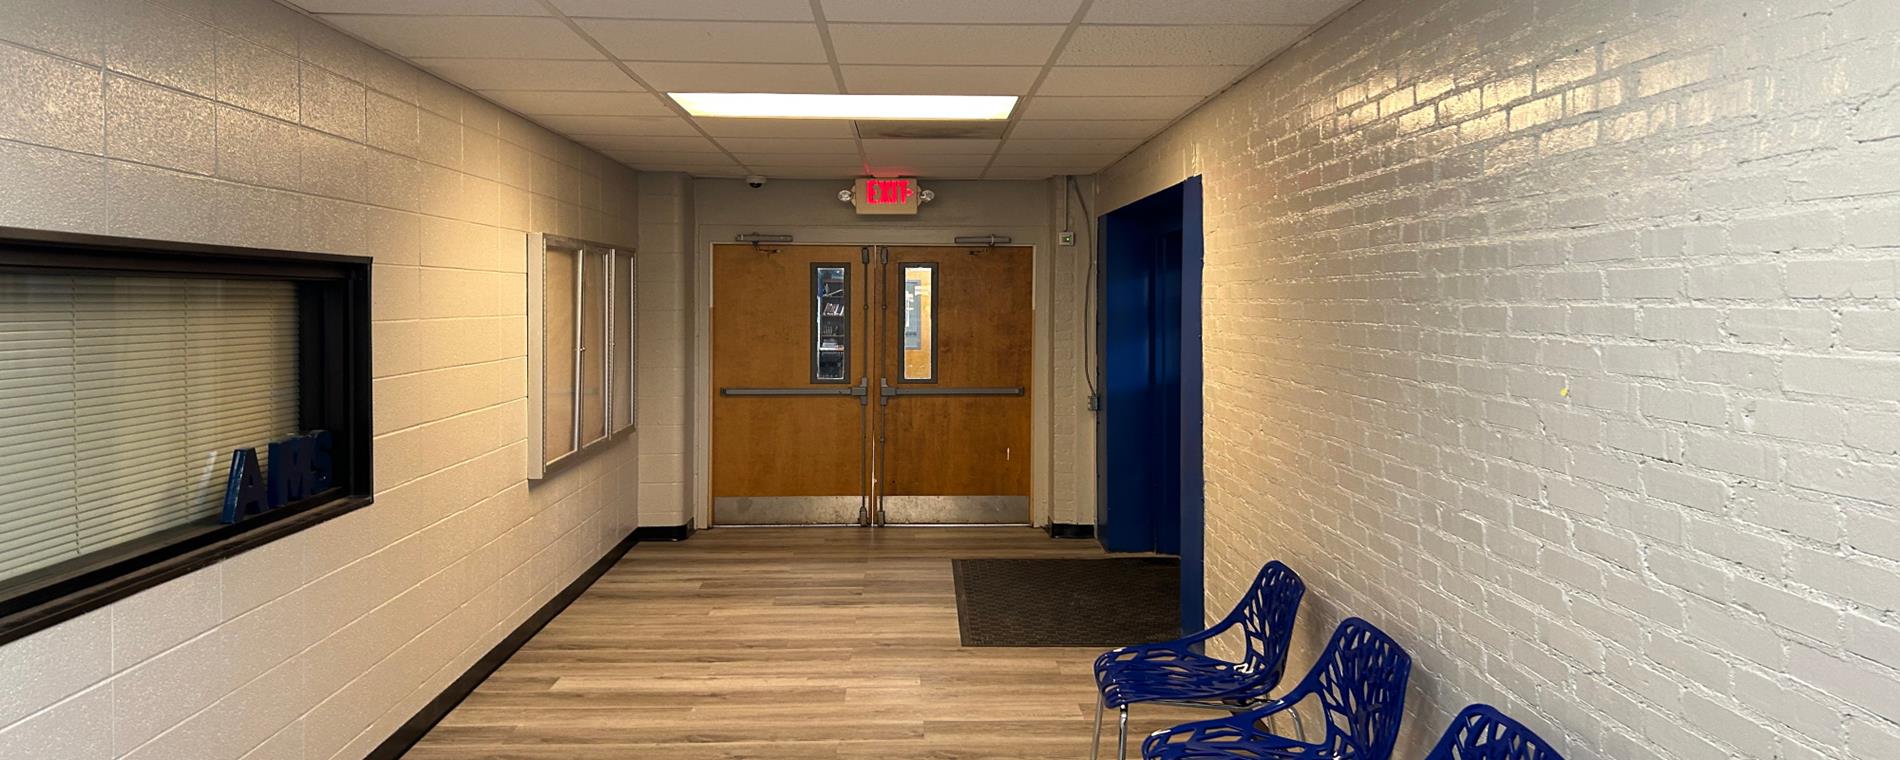 Middle School building renovations